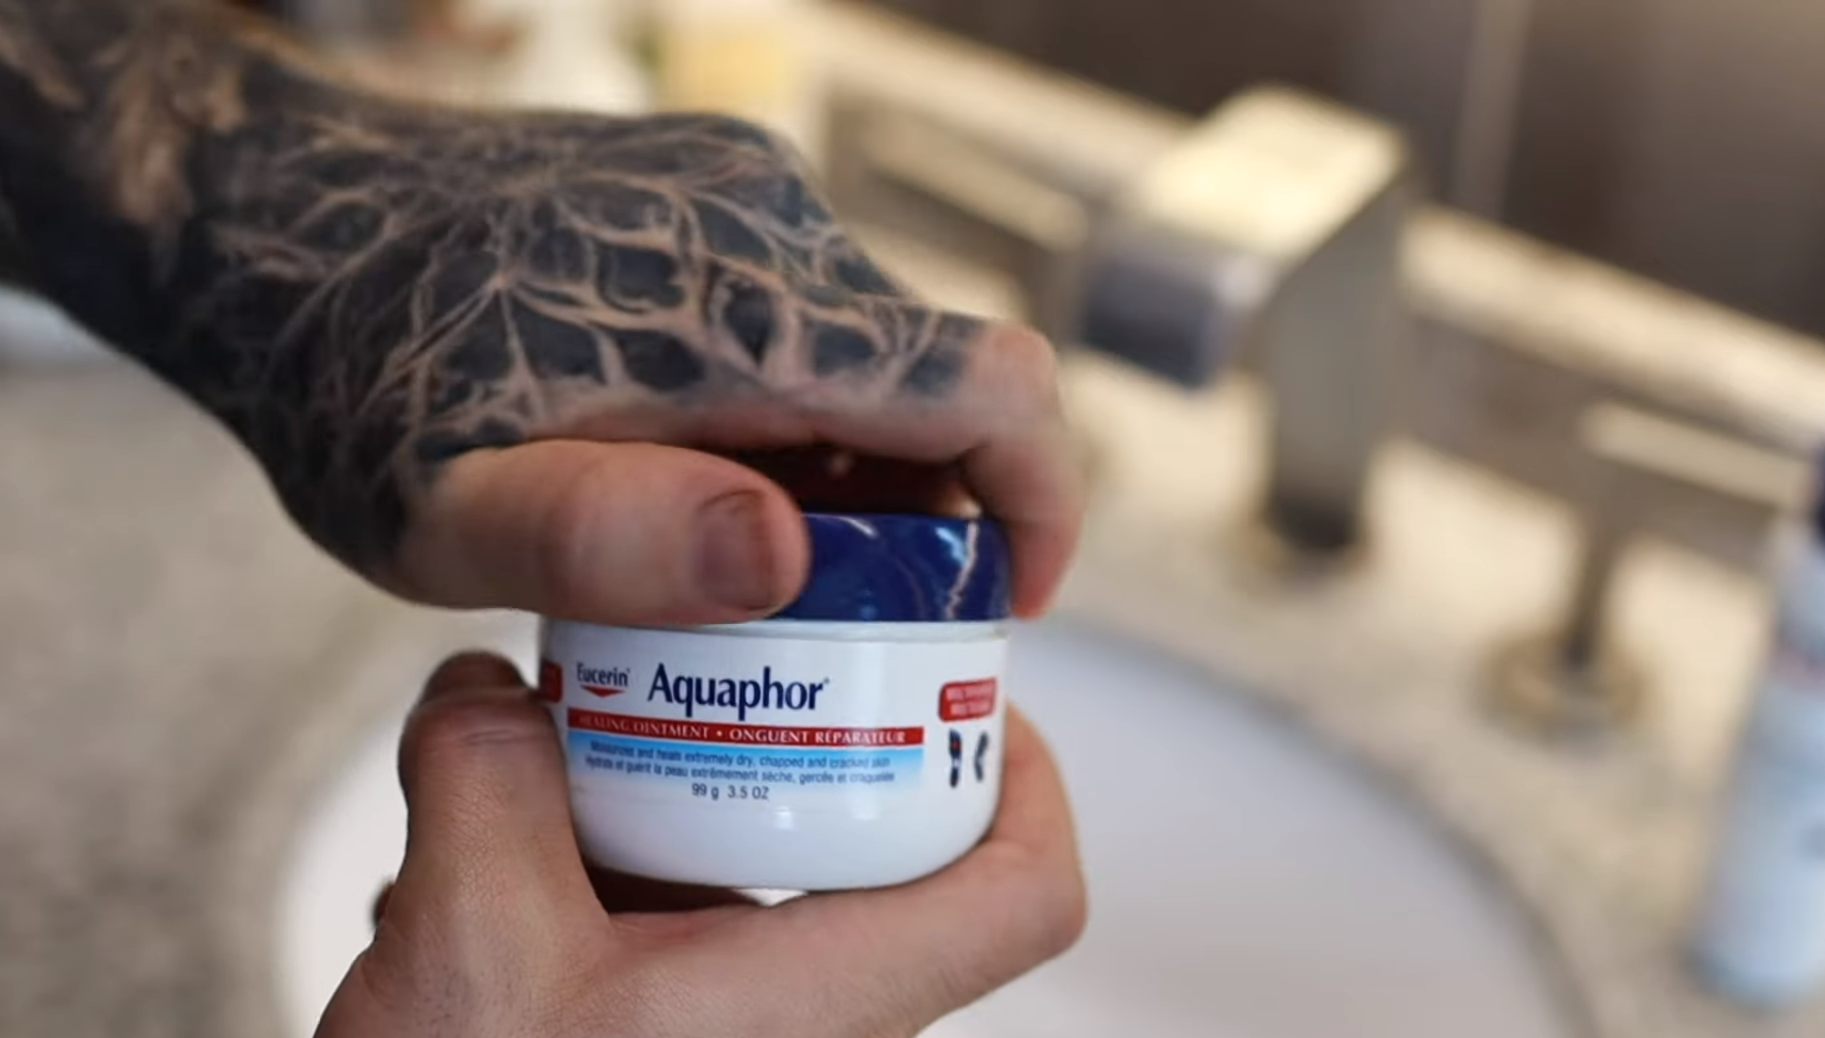 How To Prep Your Tattoo And Skin Before Applying Aquaphor?